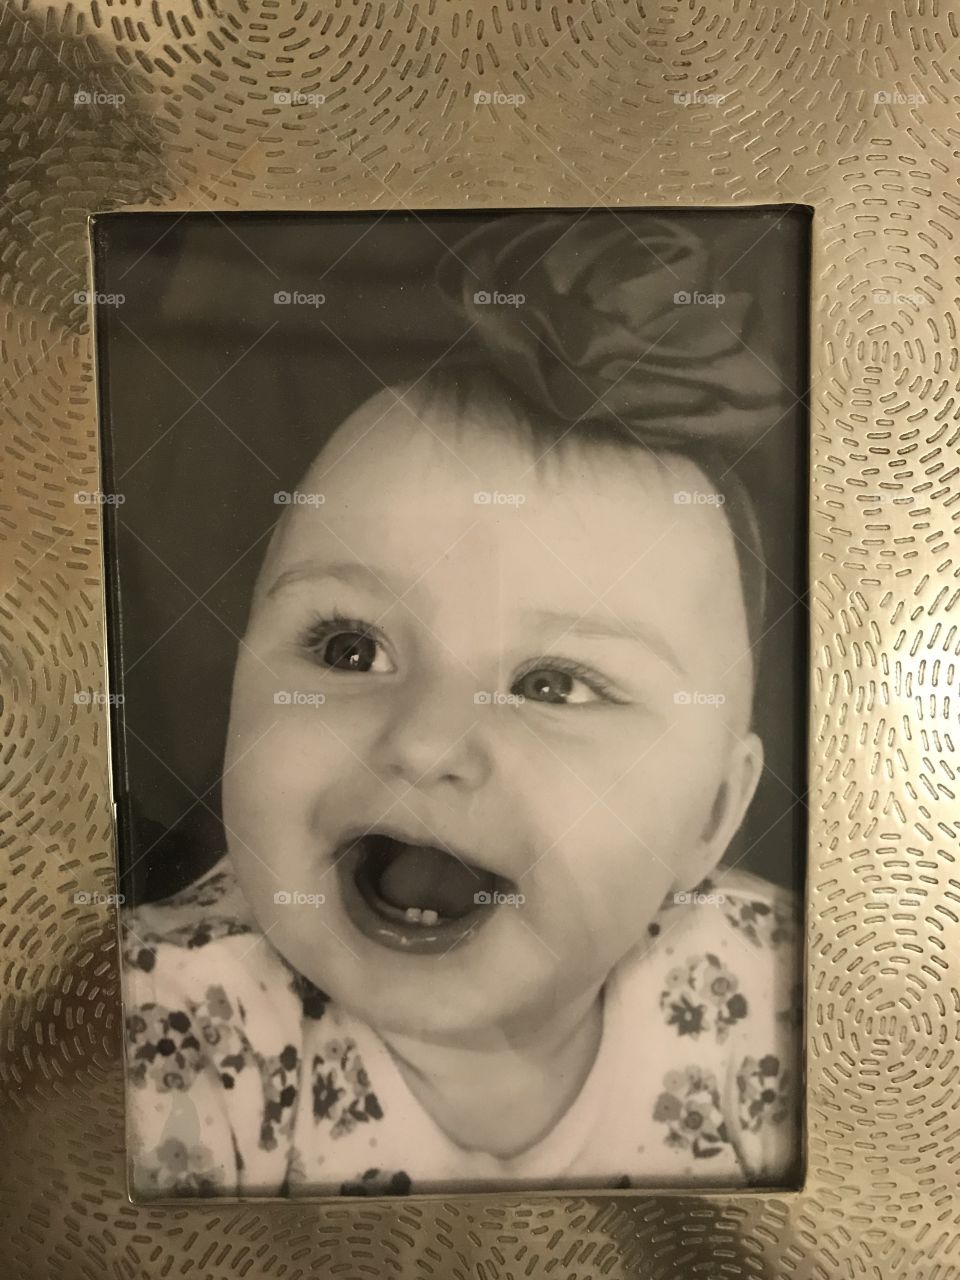 My niece Lisa when she was a baby.